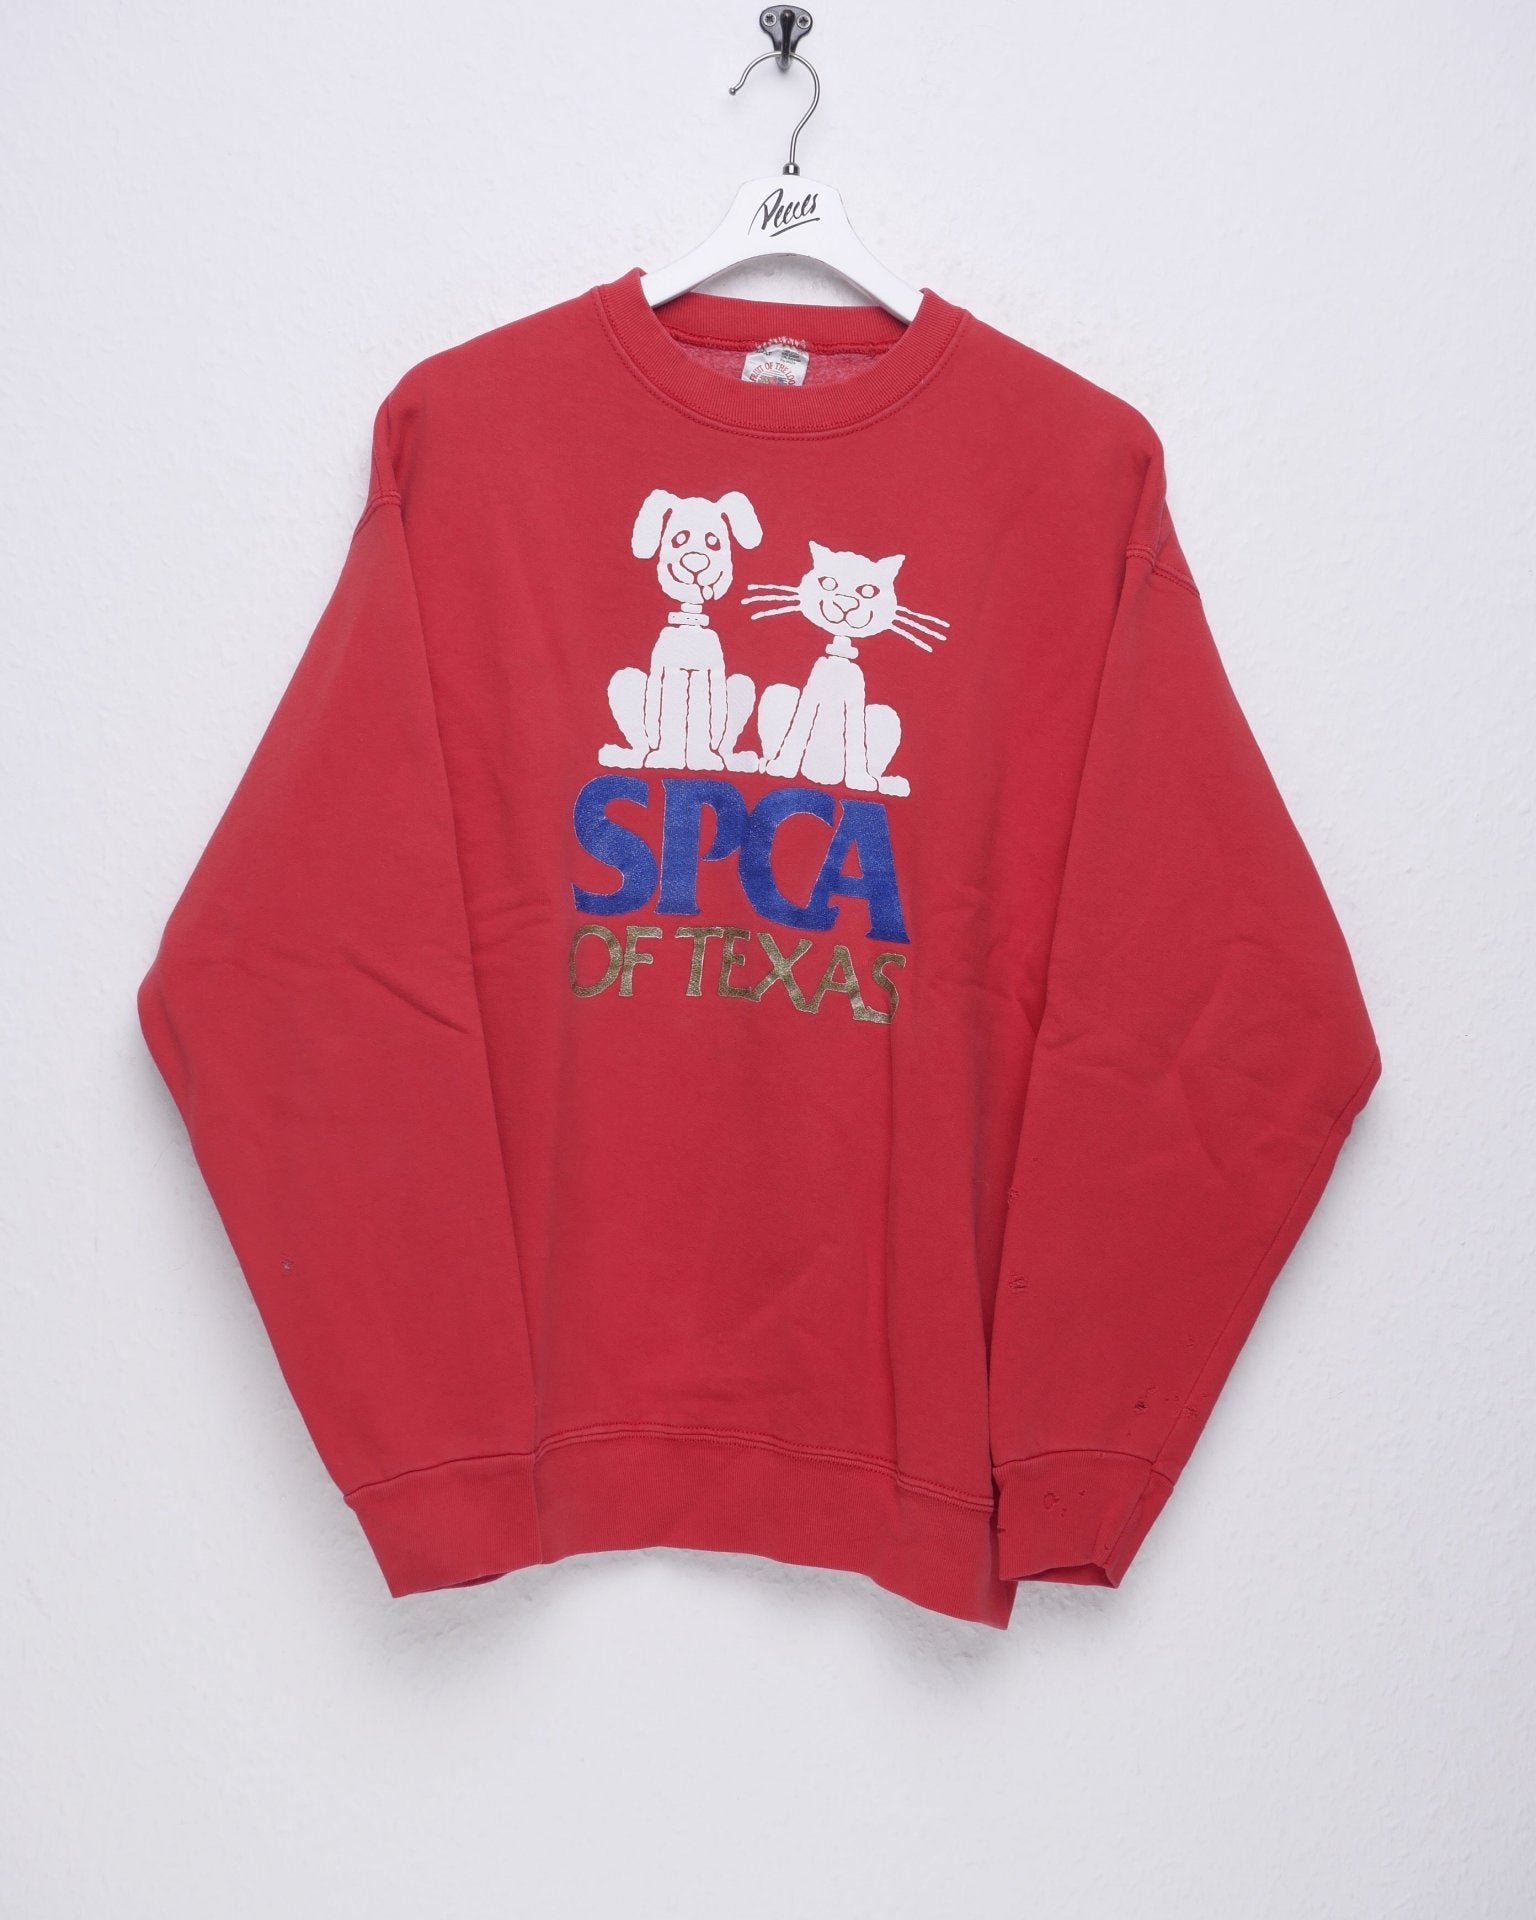 SPCA of Texas printed Graphic red Sweater - Peeces